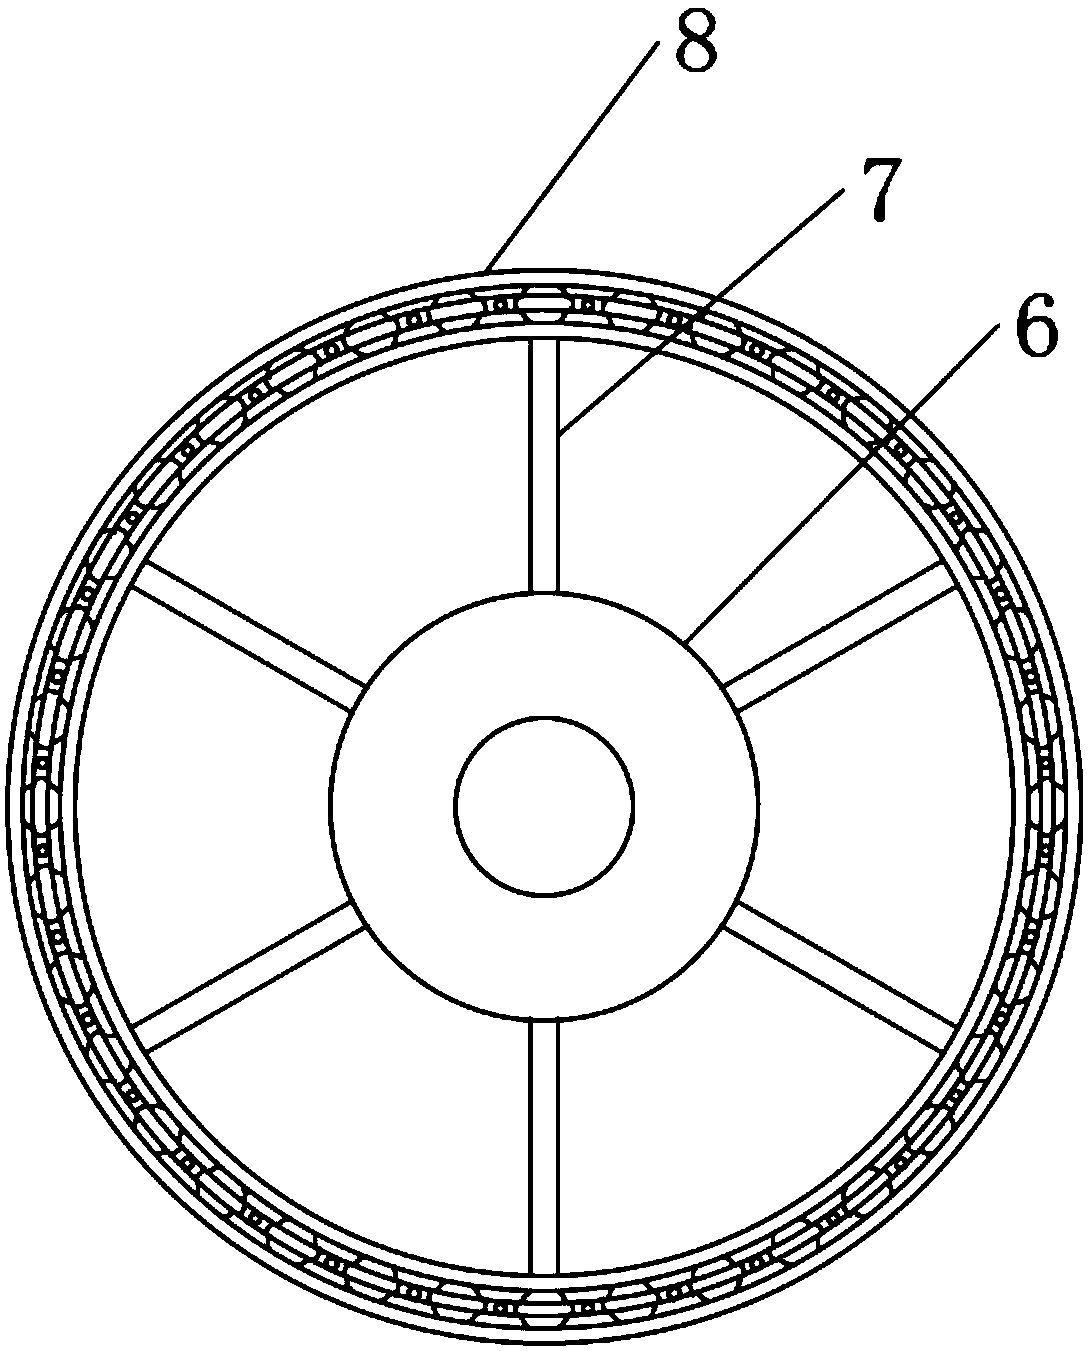 Fettling device for ceramic processing